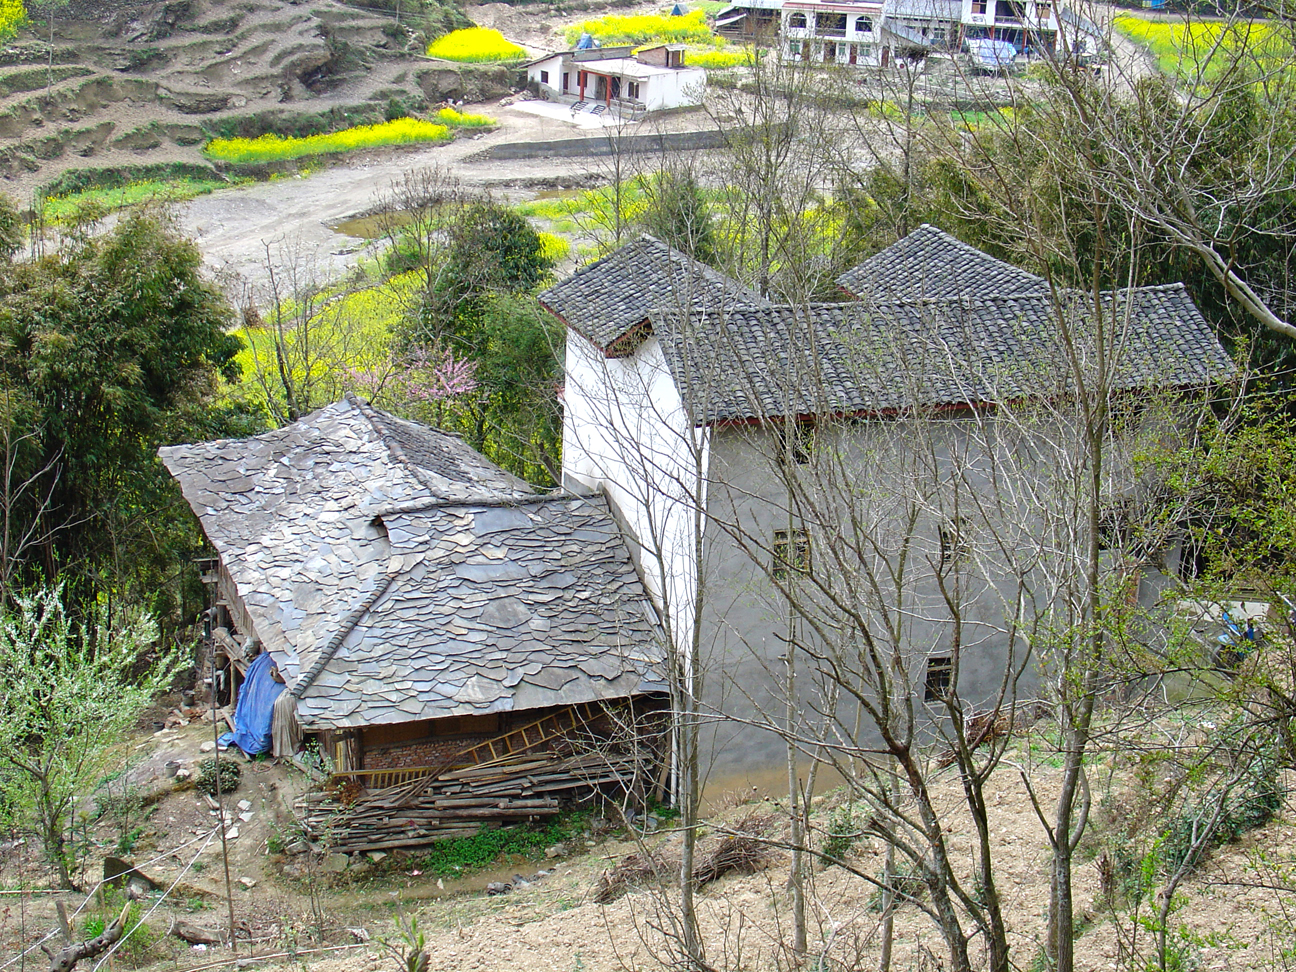 The small village on the hills I